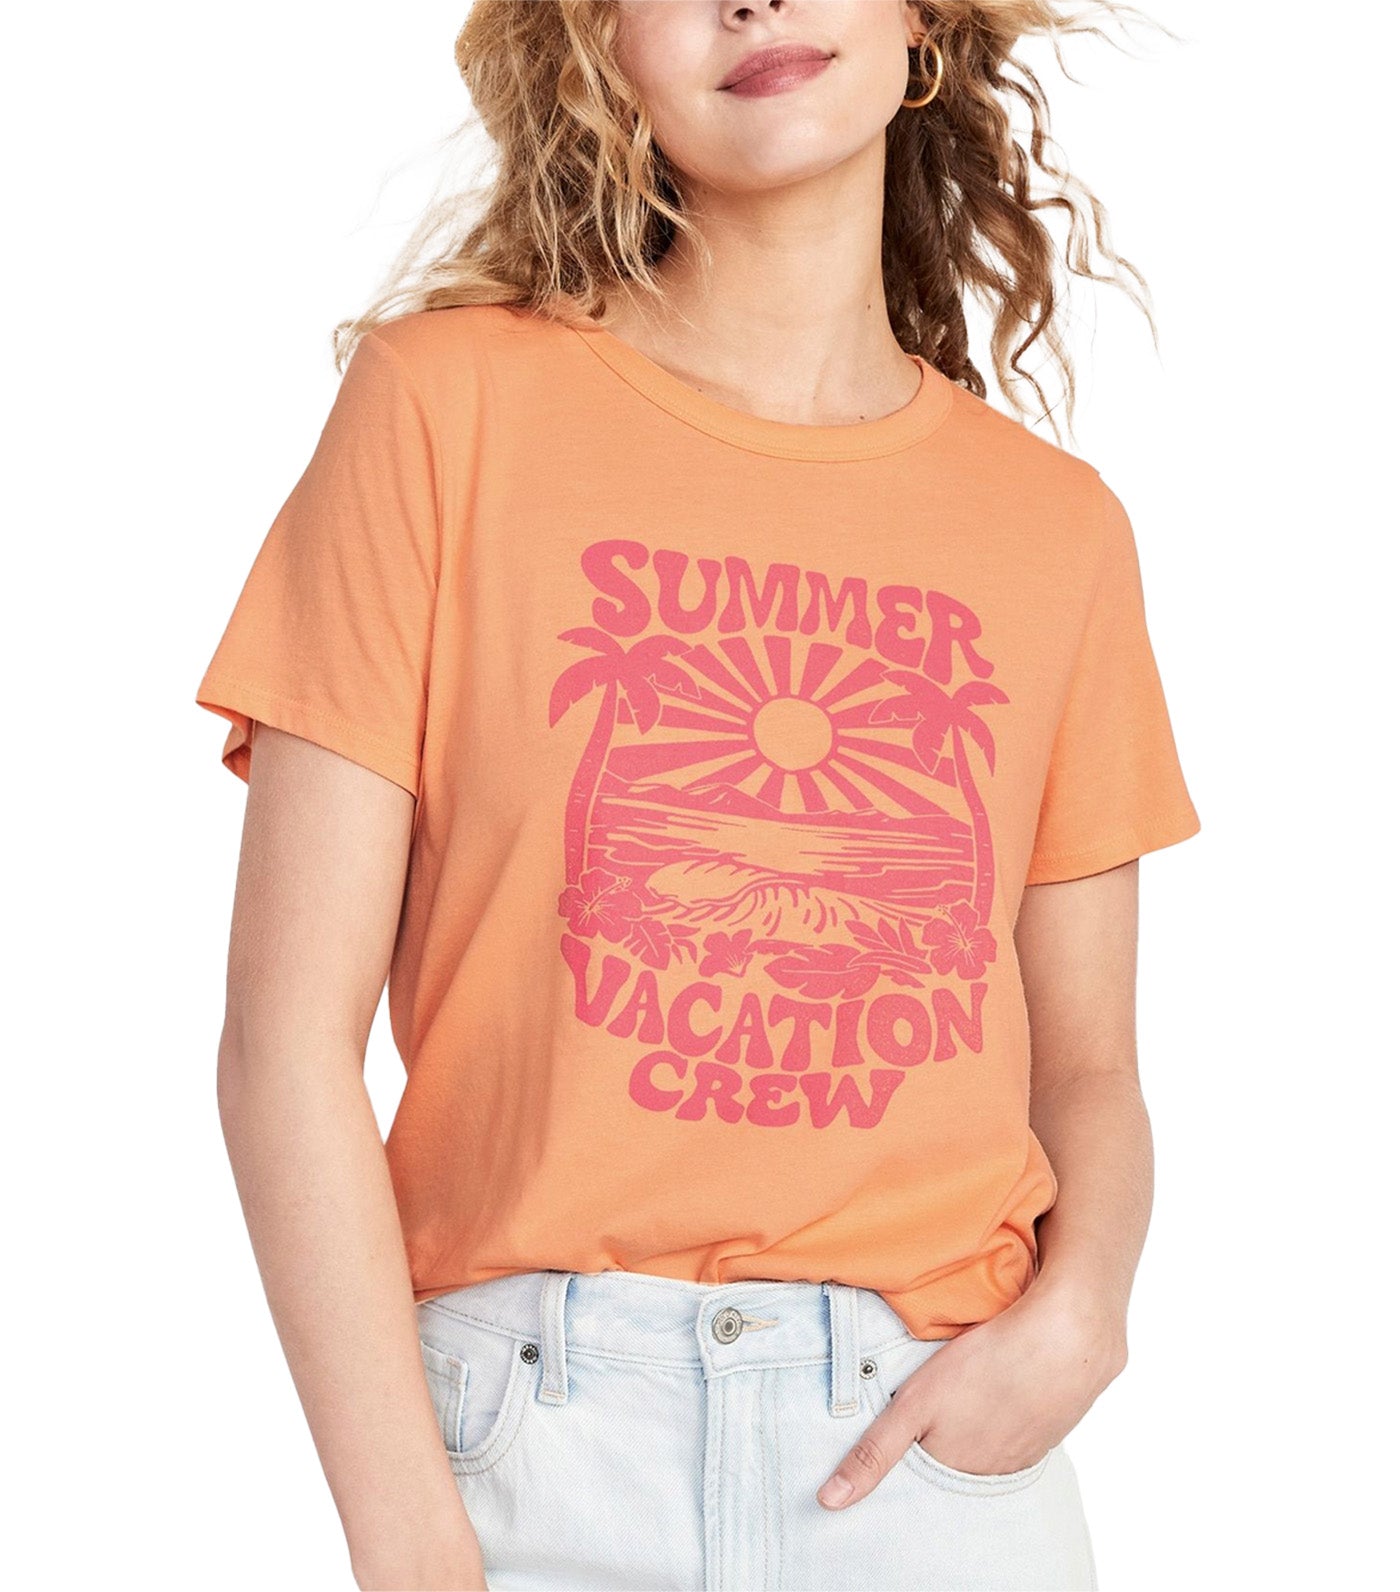 EveryWear Graphic T-Shirt for Women Family Vacation